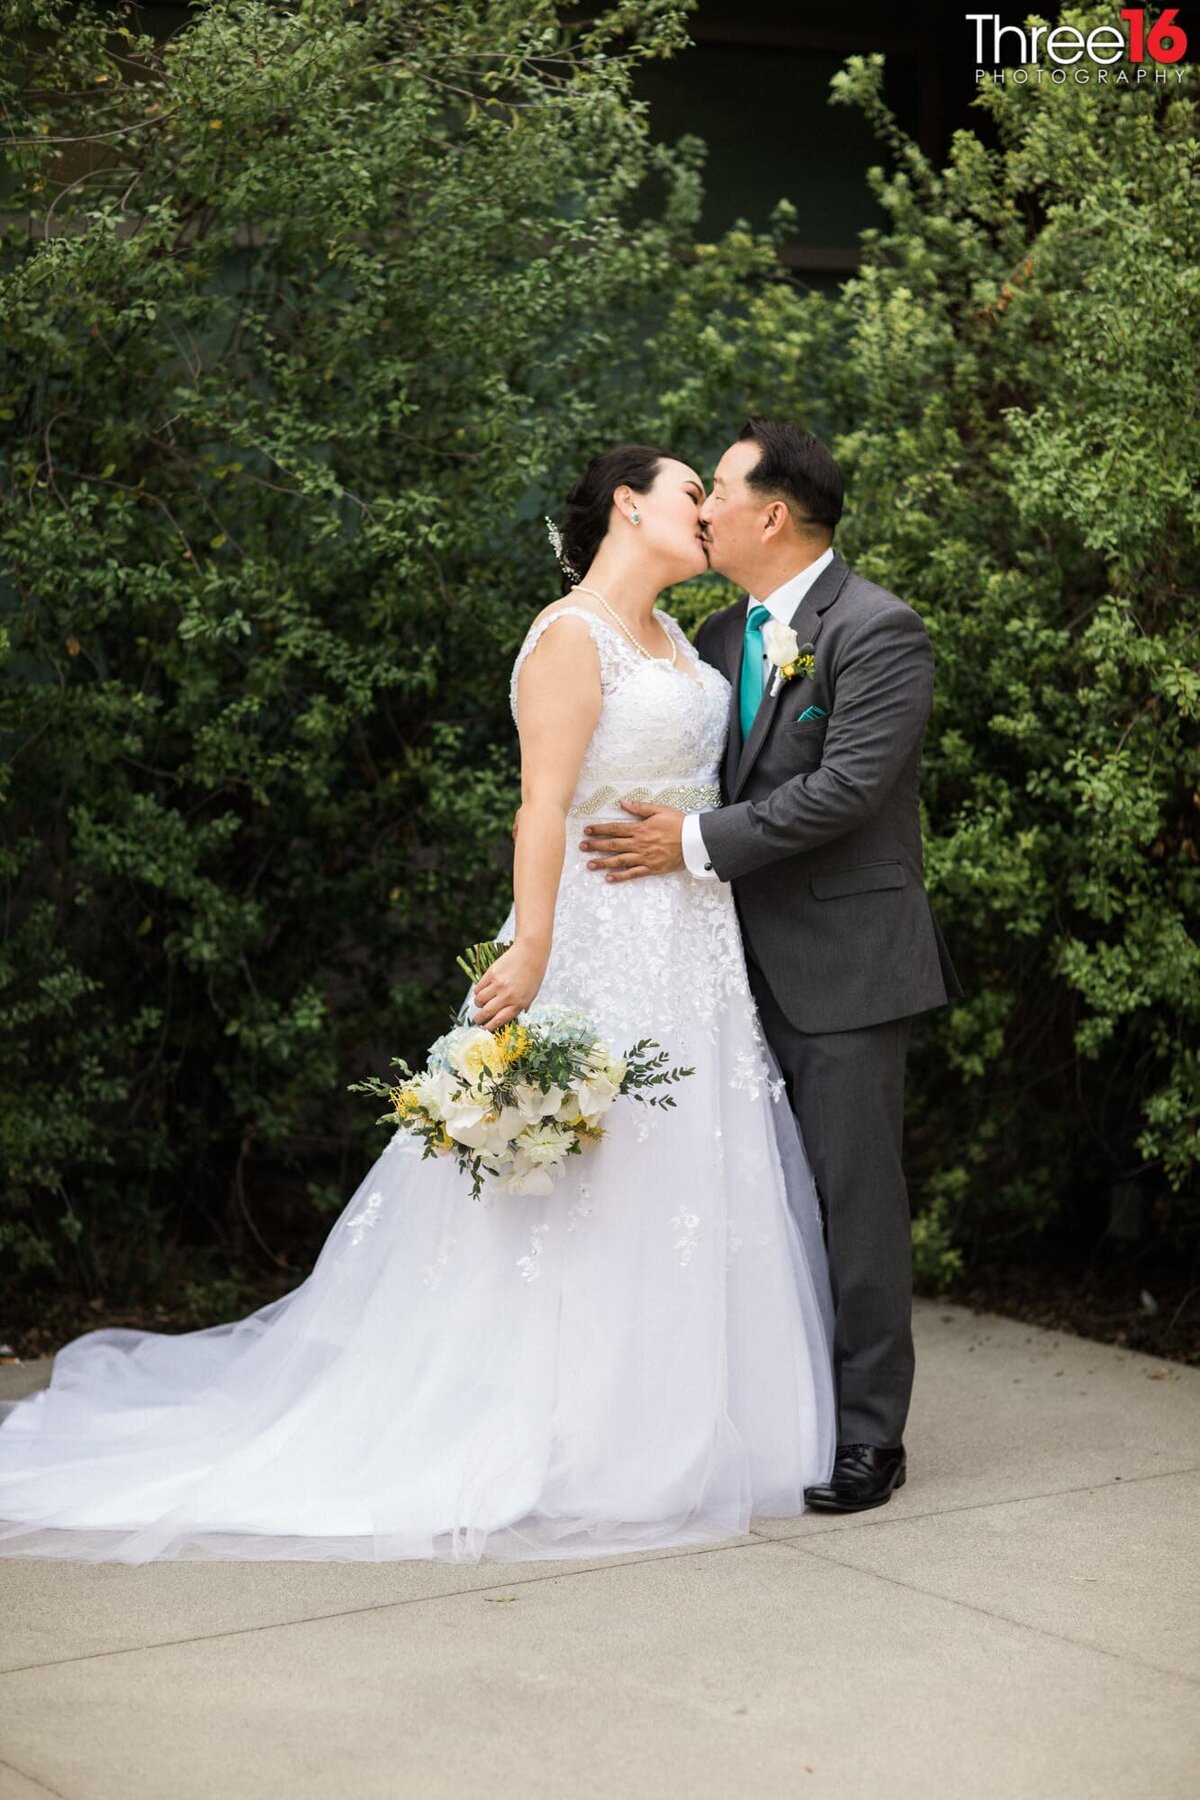 Bride and Groom share a kiss in front of green plants at the Fullerton Community Center wedding venue